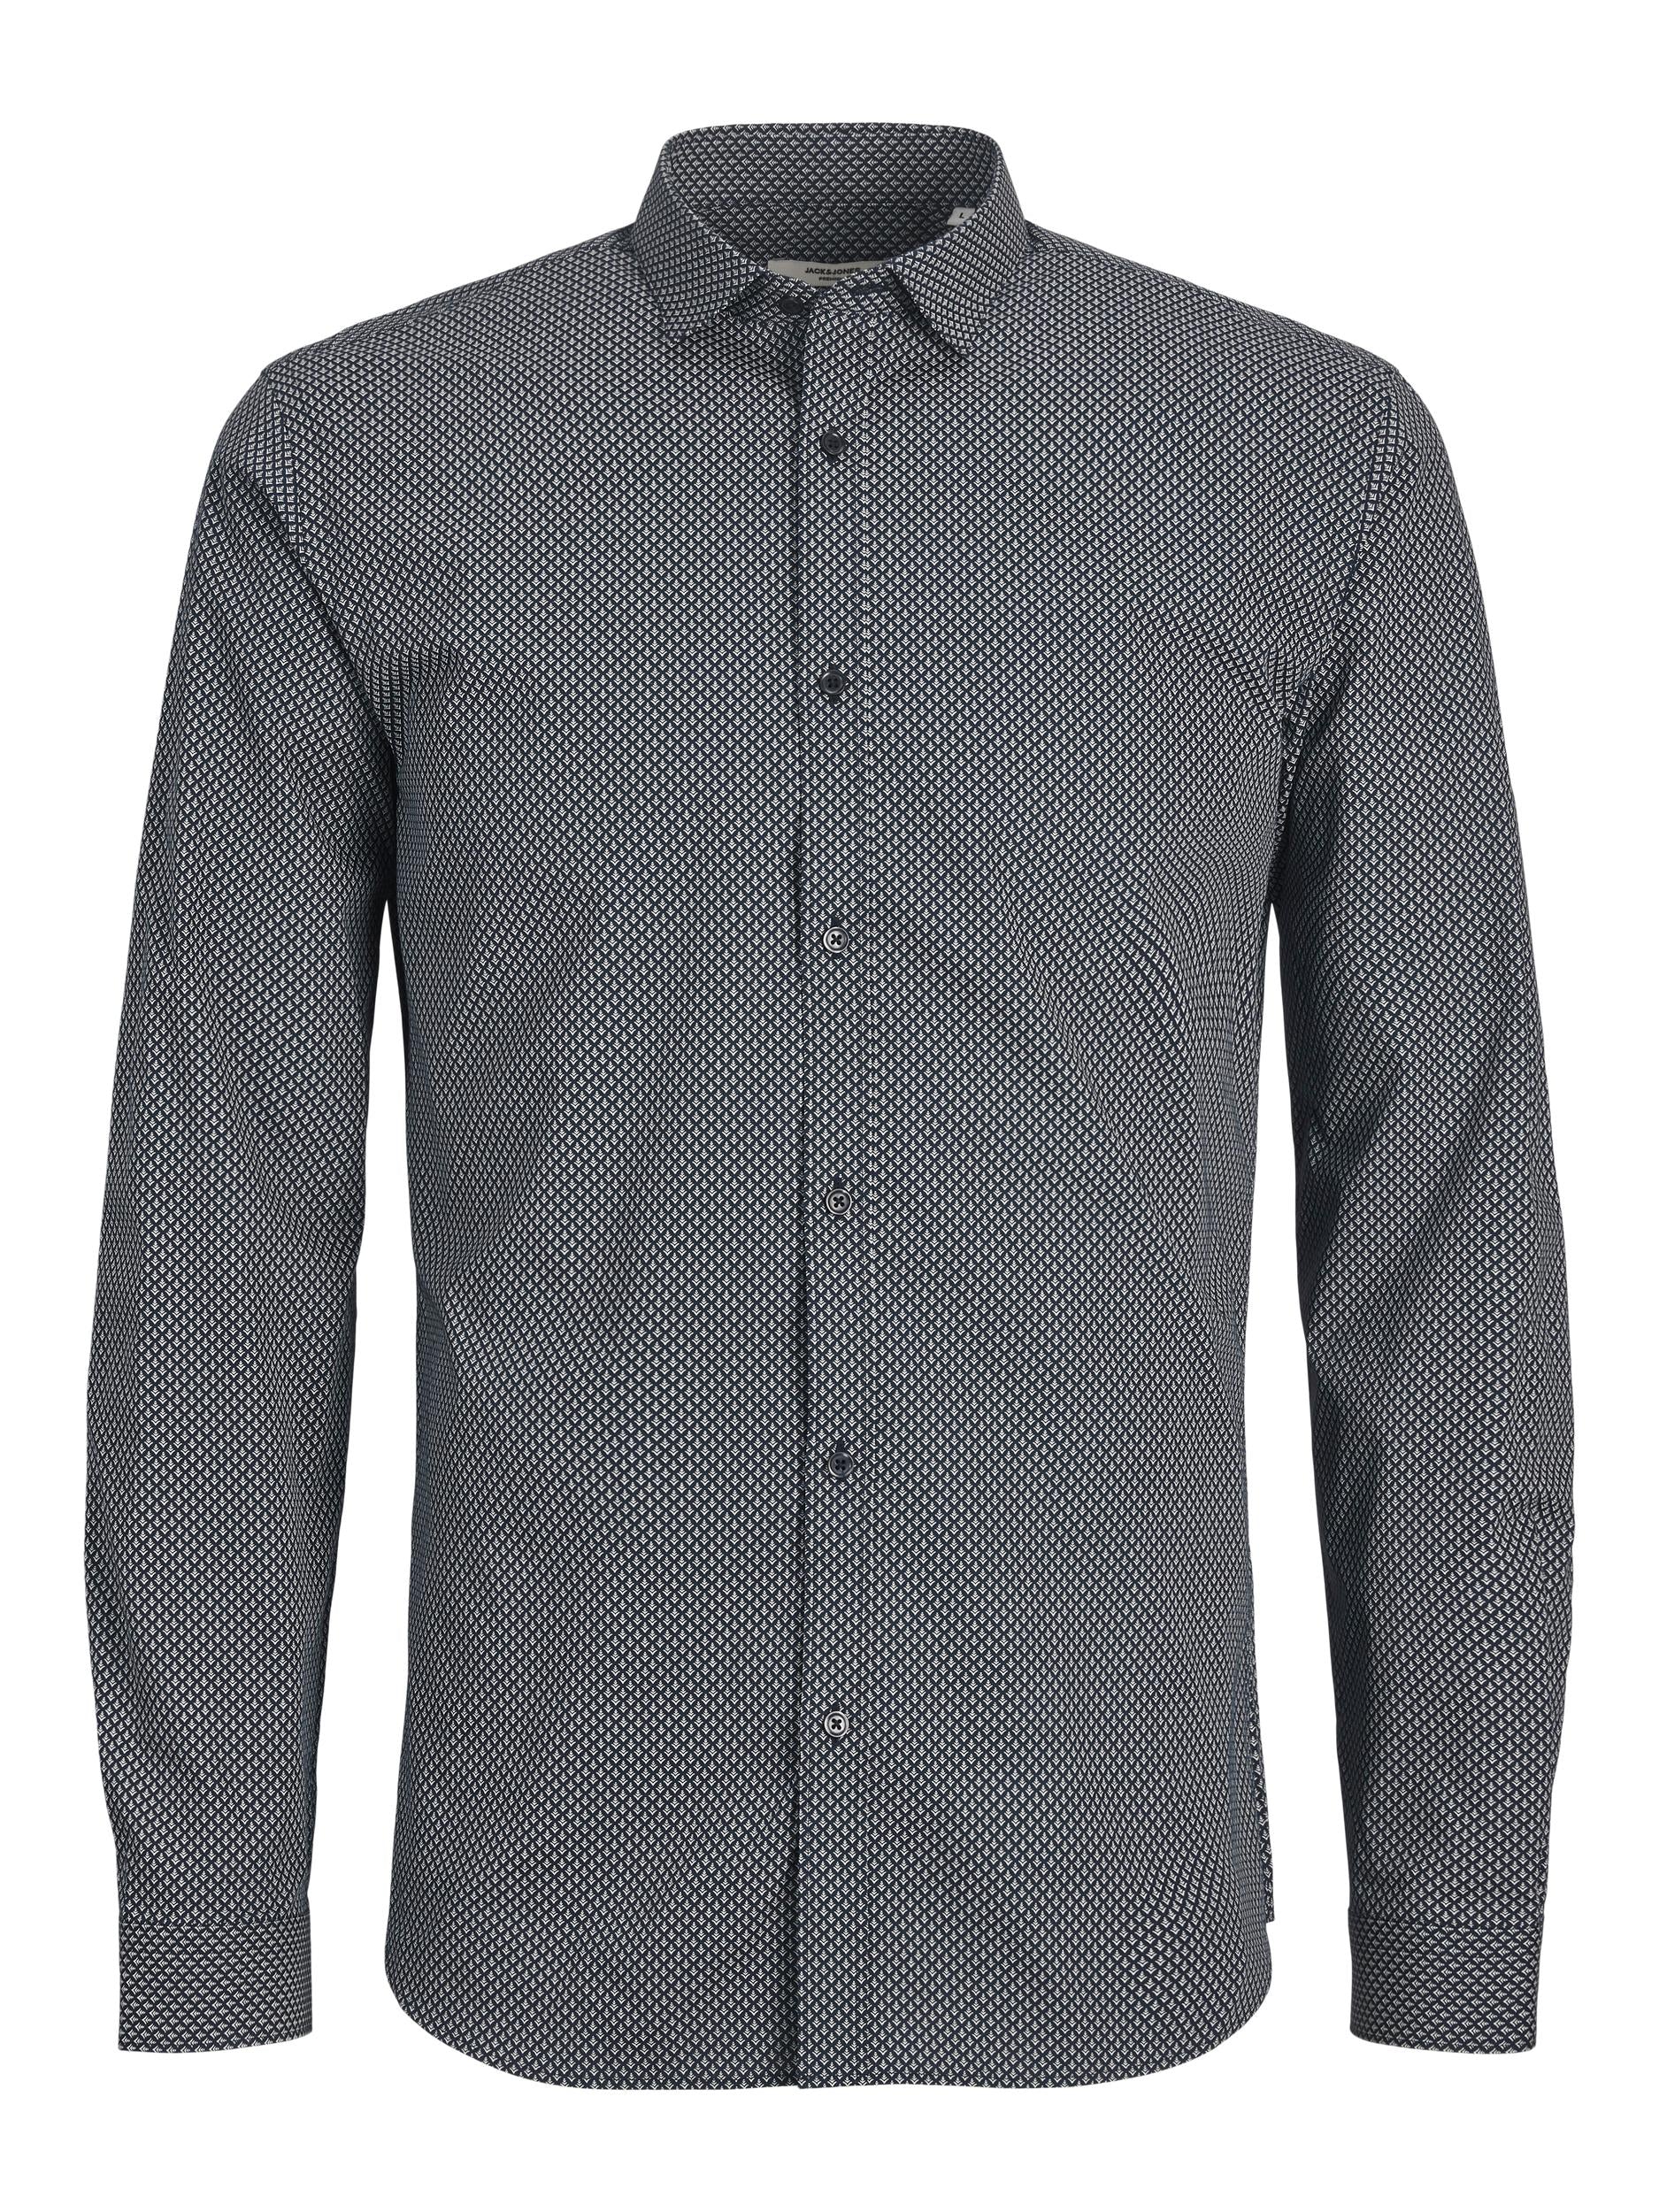 Men's Cardiff Print Shirt Long Sleeve Perfect Navy-Front View